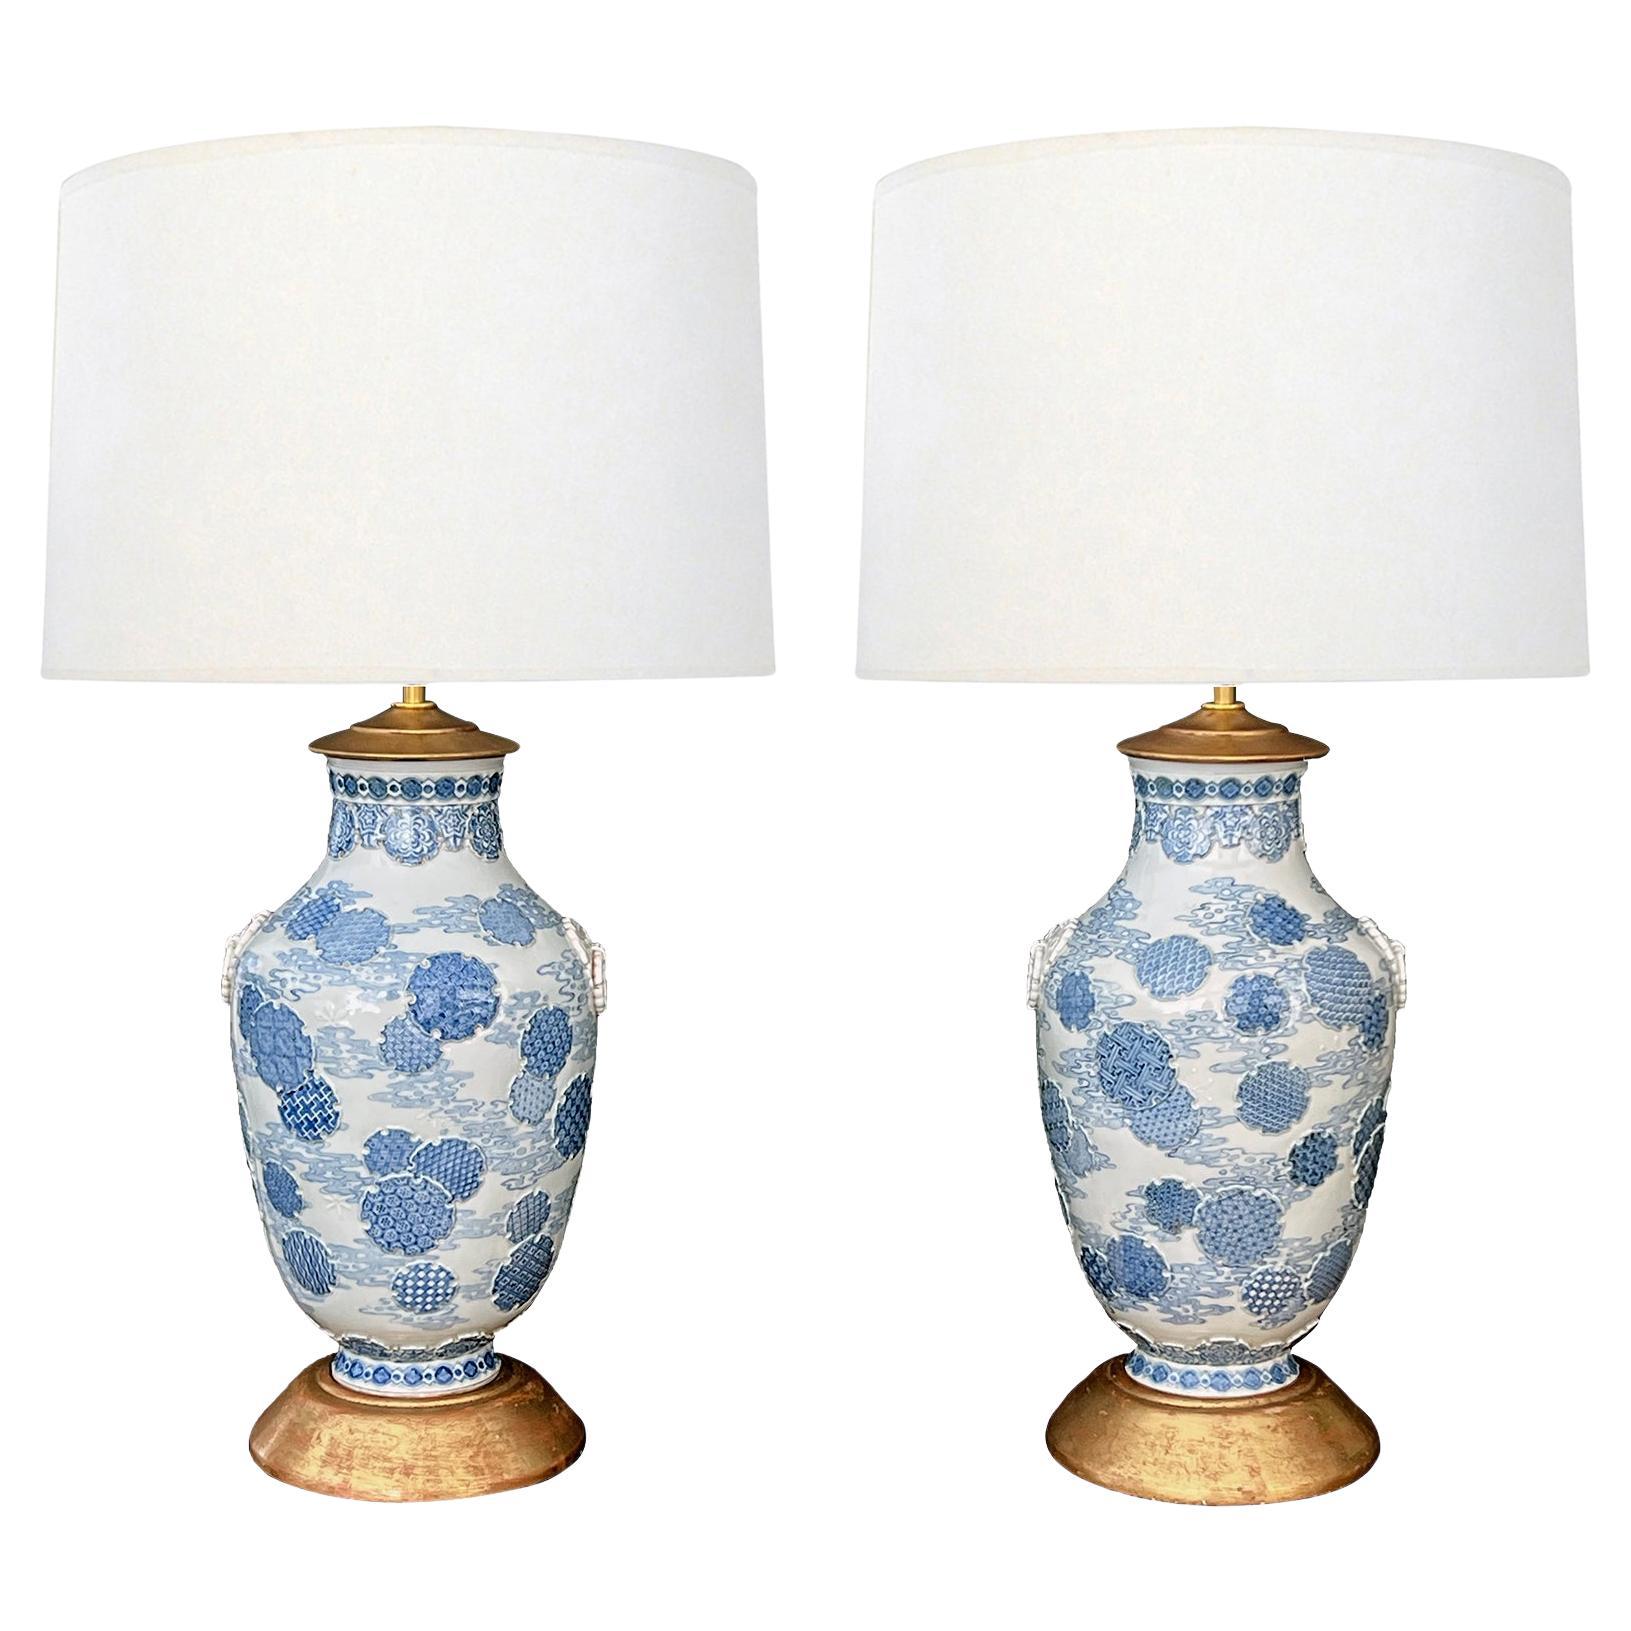 Important Pair of Japanese Meiji Period Blue & White Vases Now Mounted as Lamps For Sale